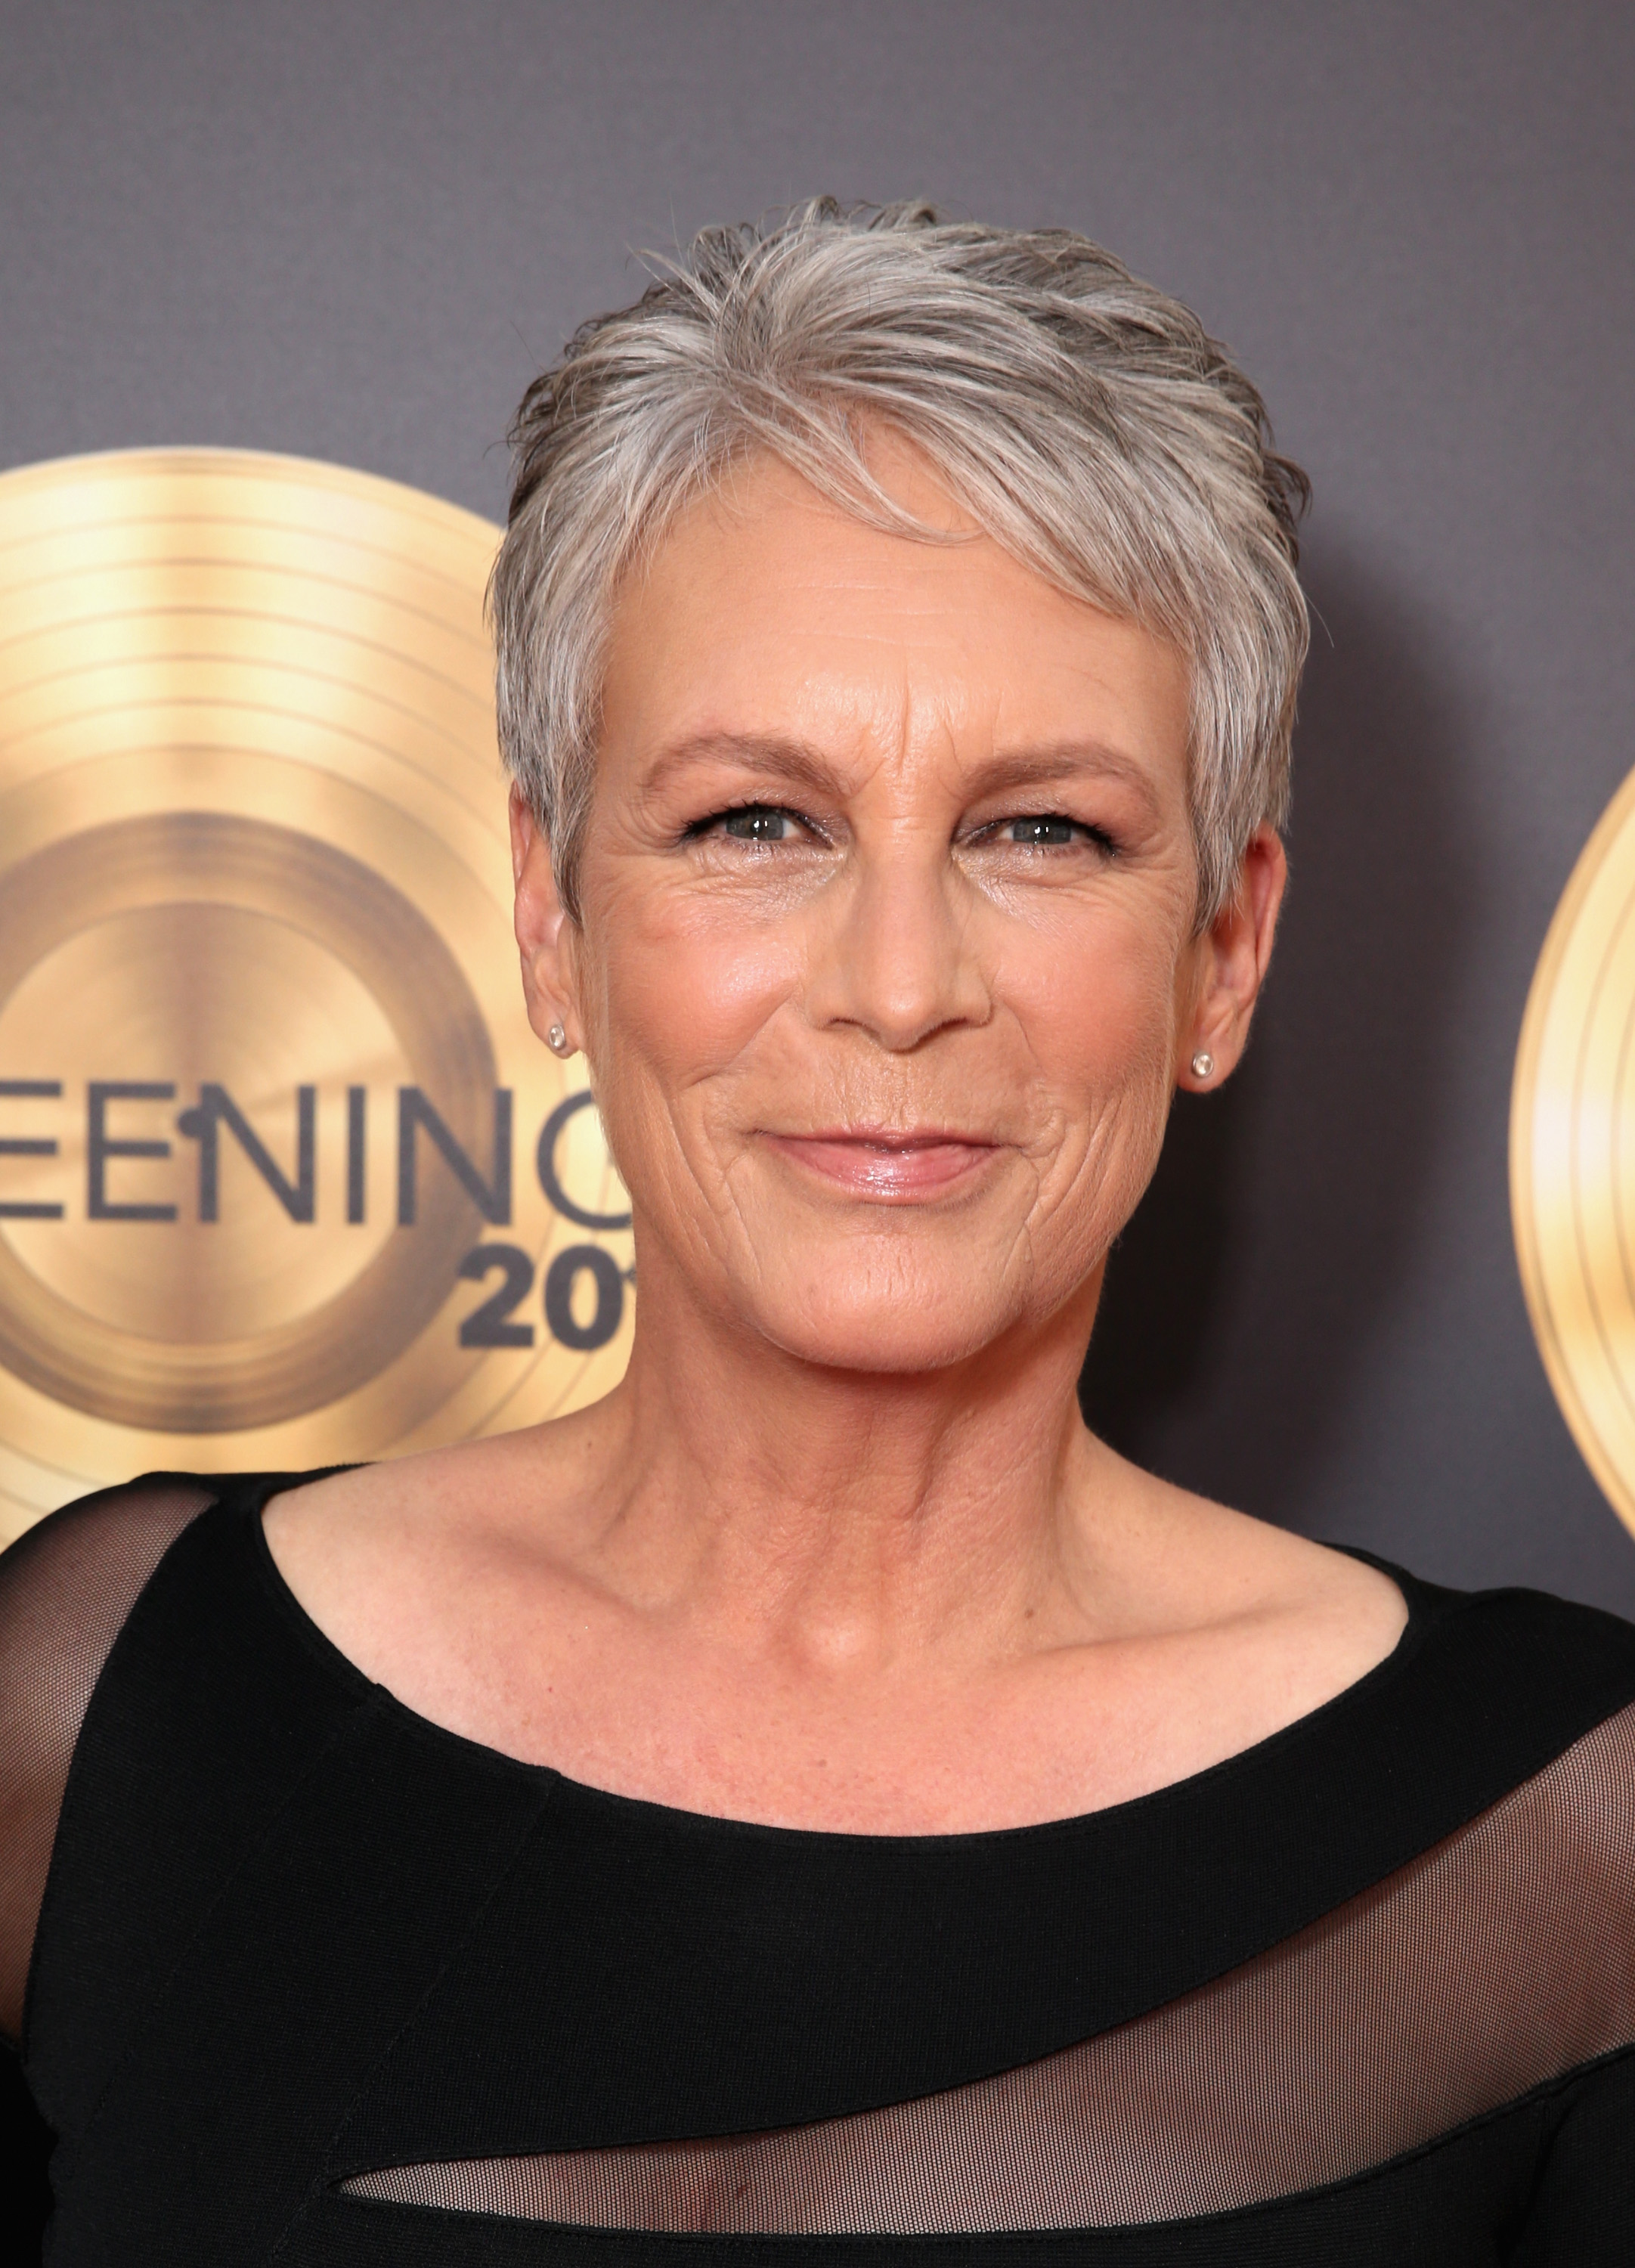 Jamie Lee Curtis on May 21, 2015, in Los Angeles, California | Source: Getty Images